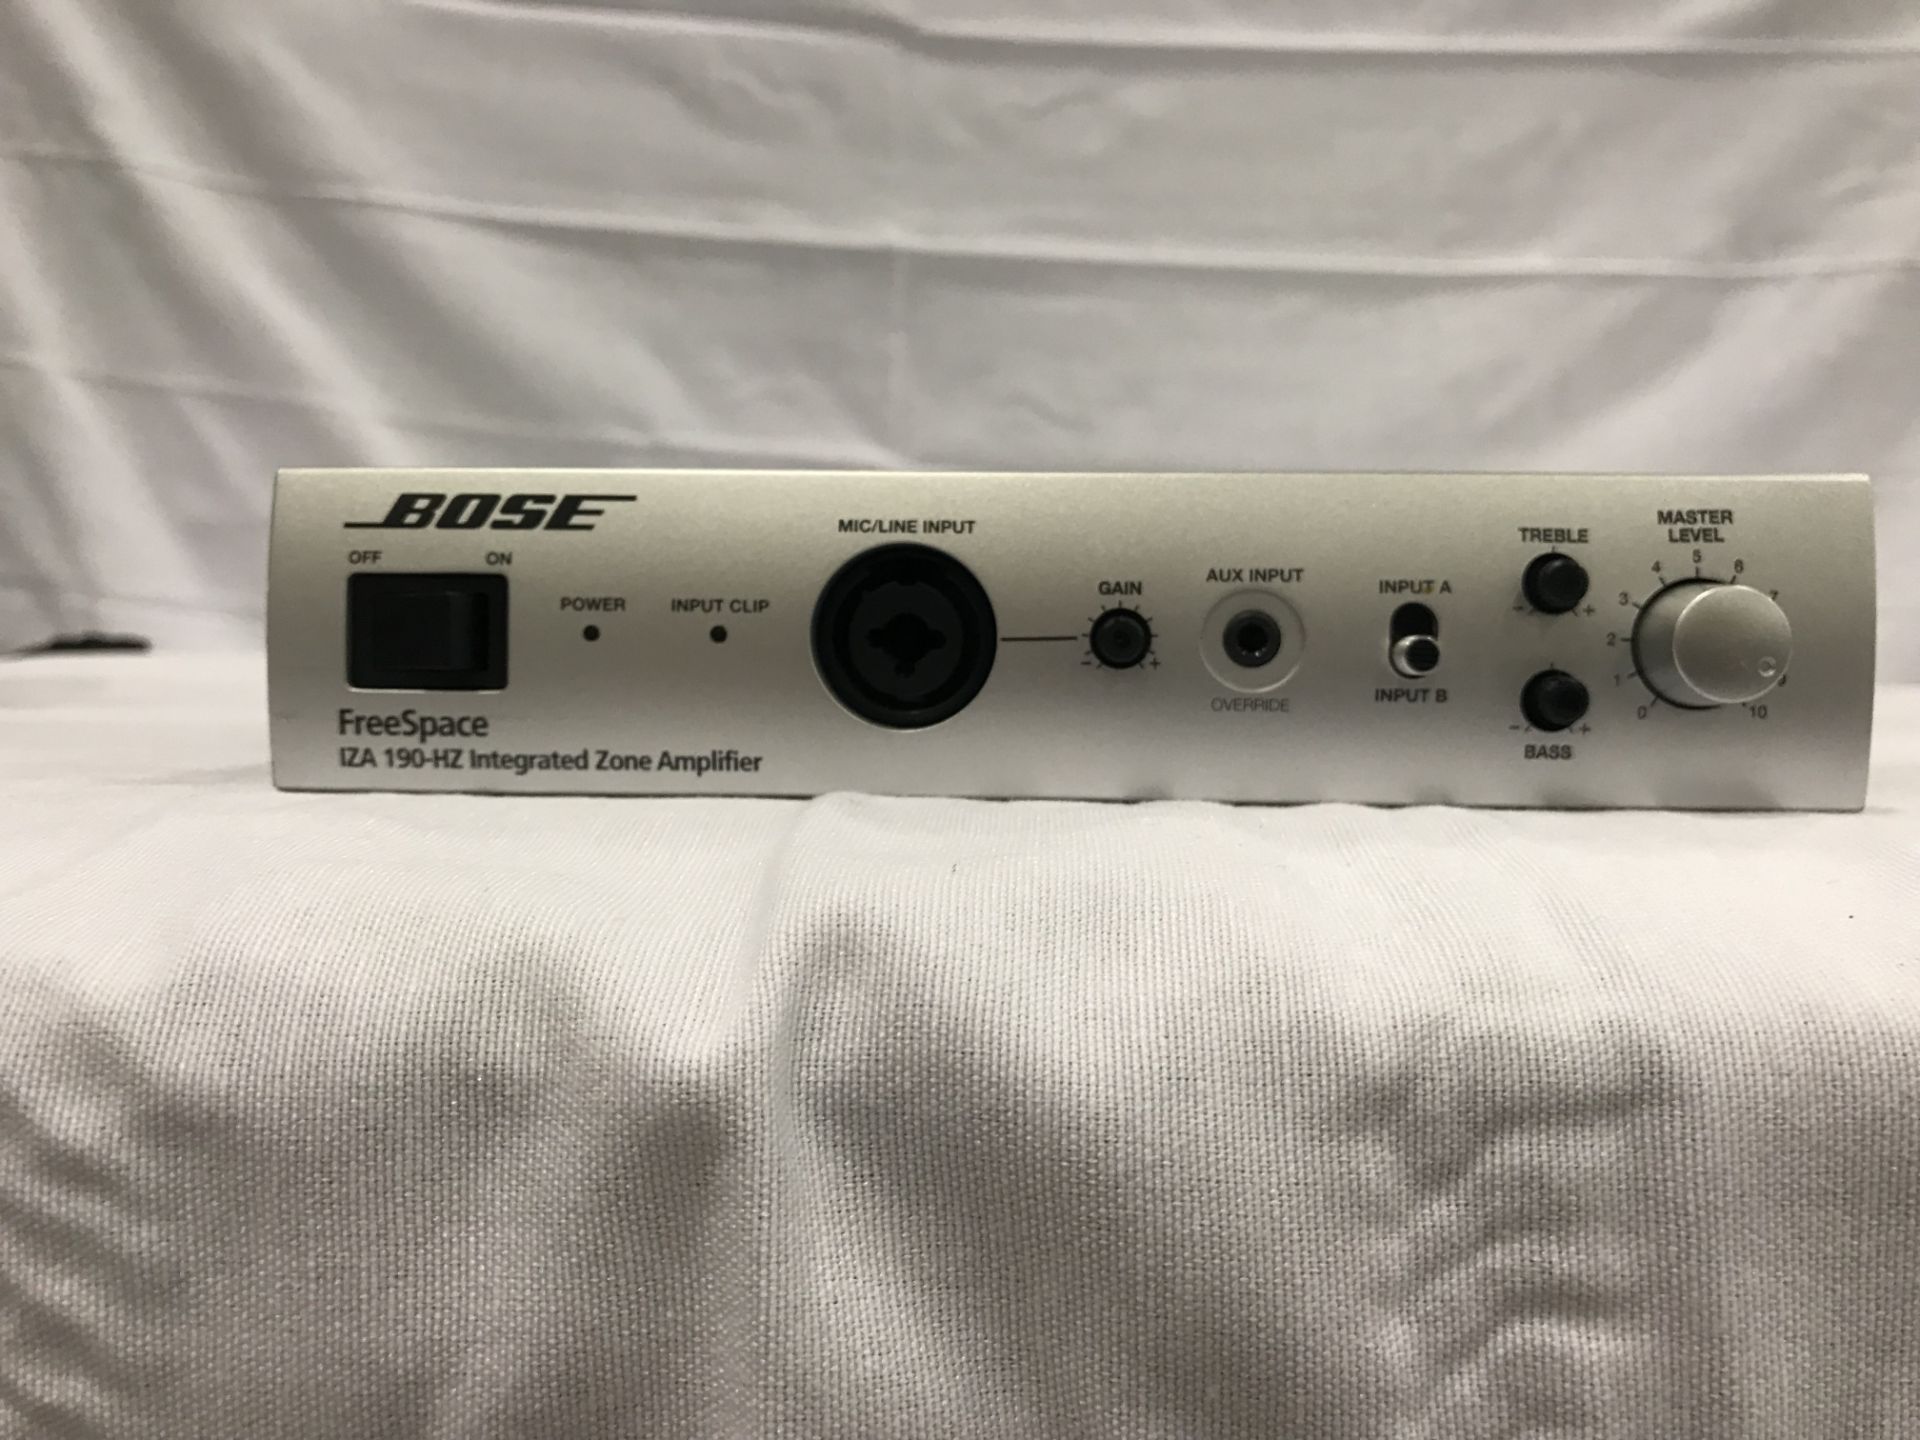 Bose Free Space IZA 190 HZ Integrated Zone Amplifier